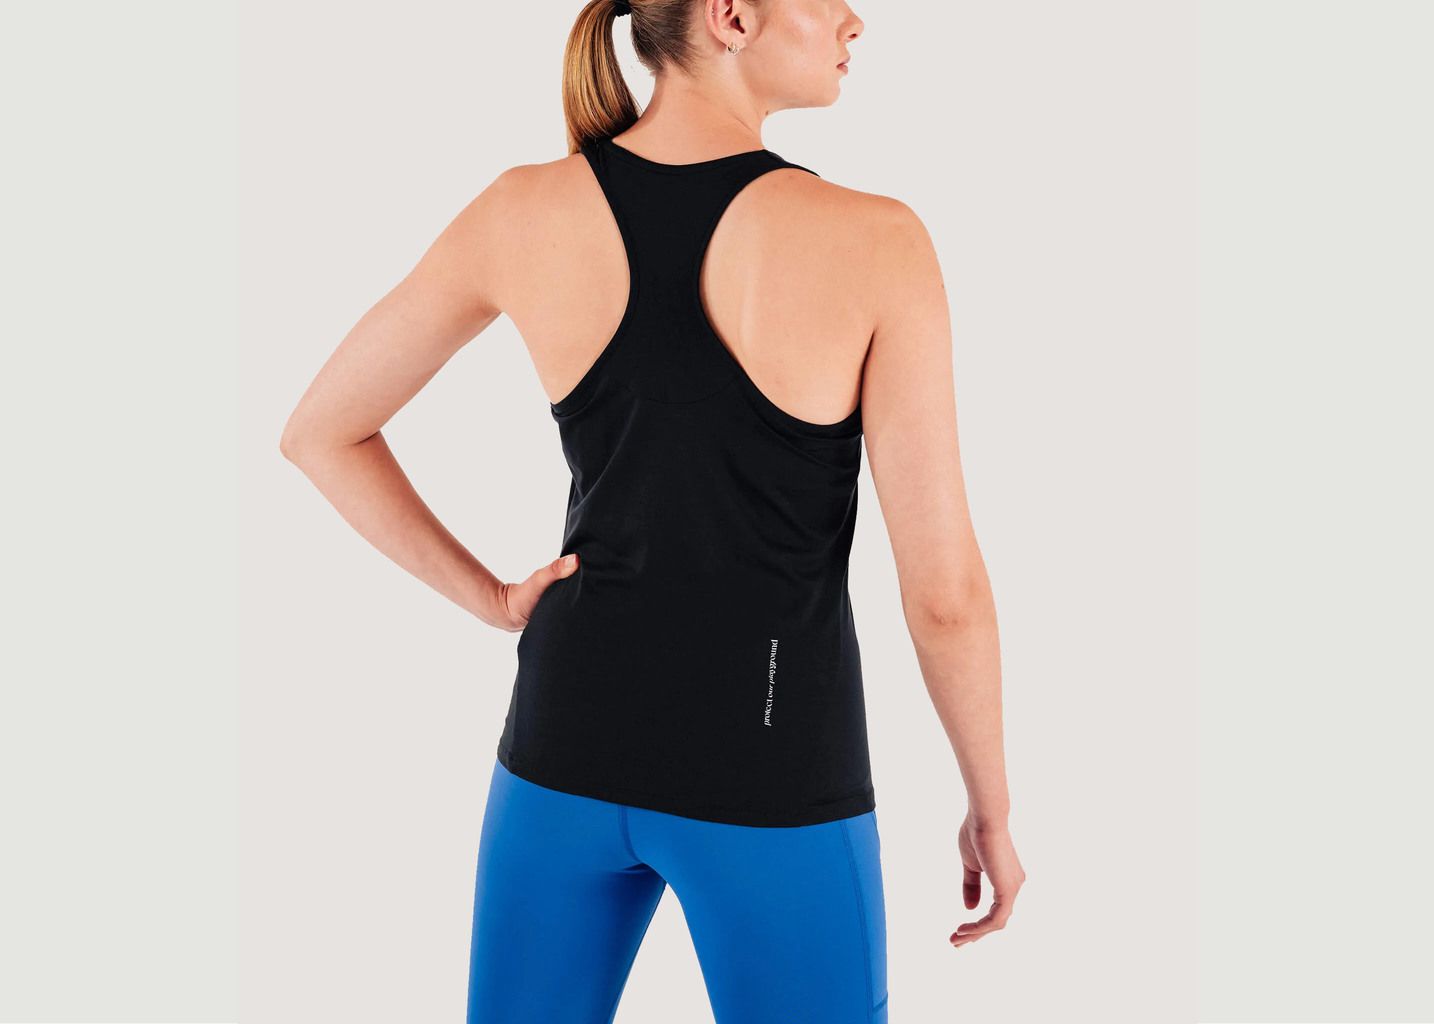 Free Your Mind Sport-Top  - Circle Sportswear